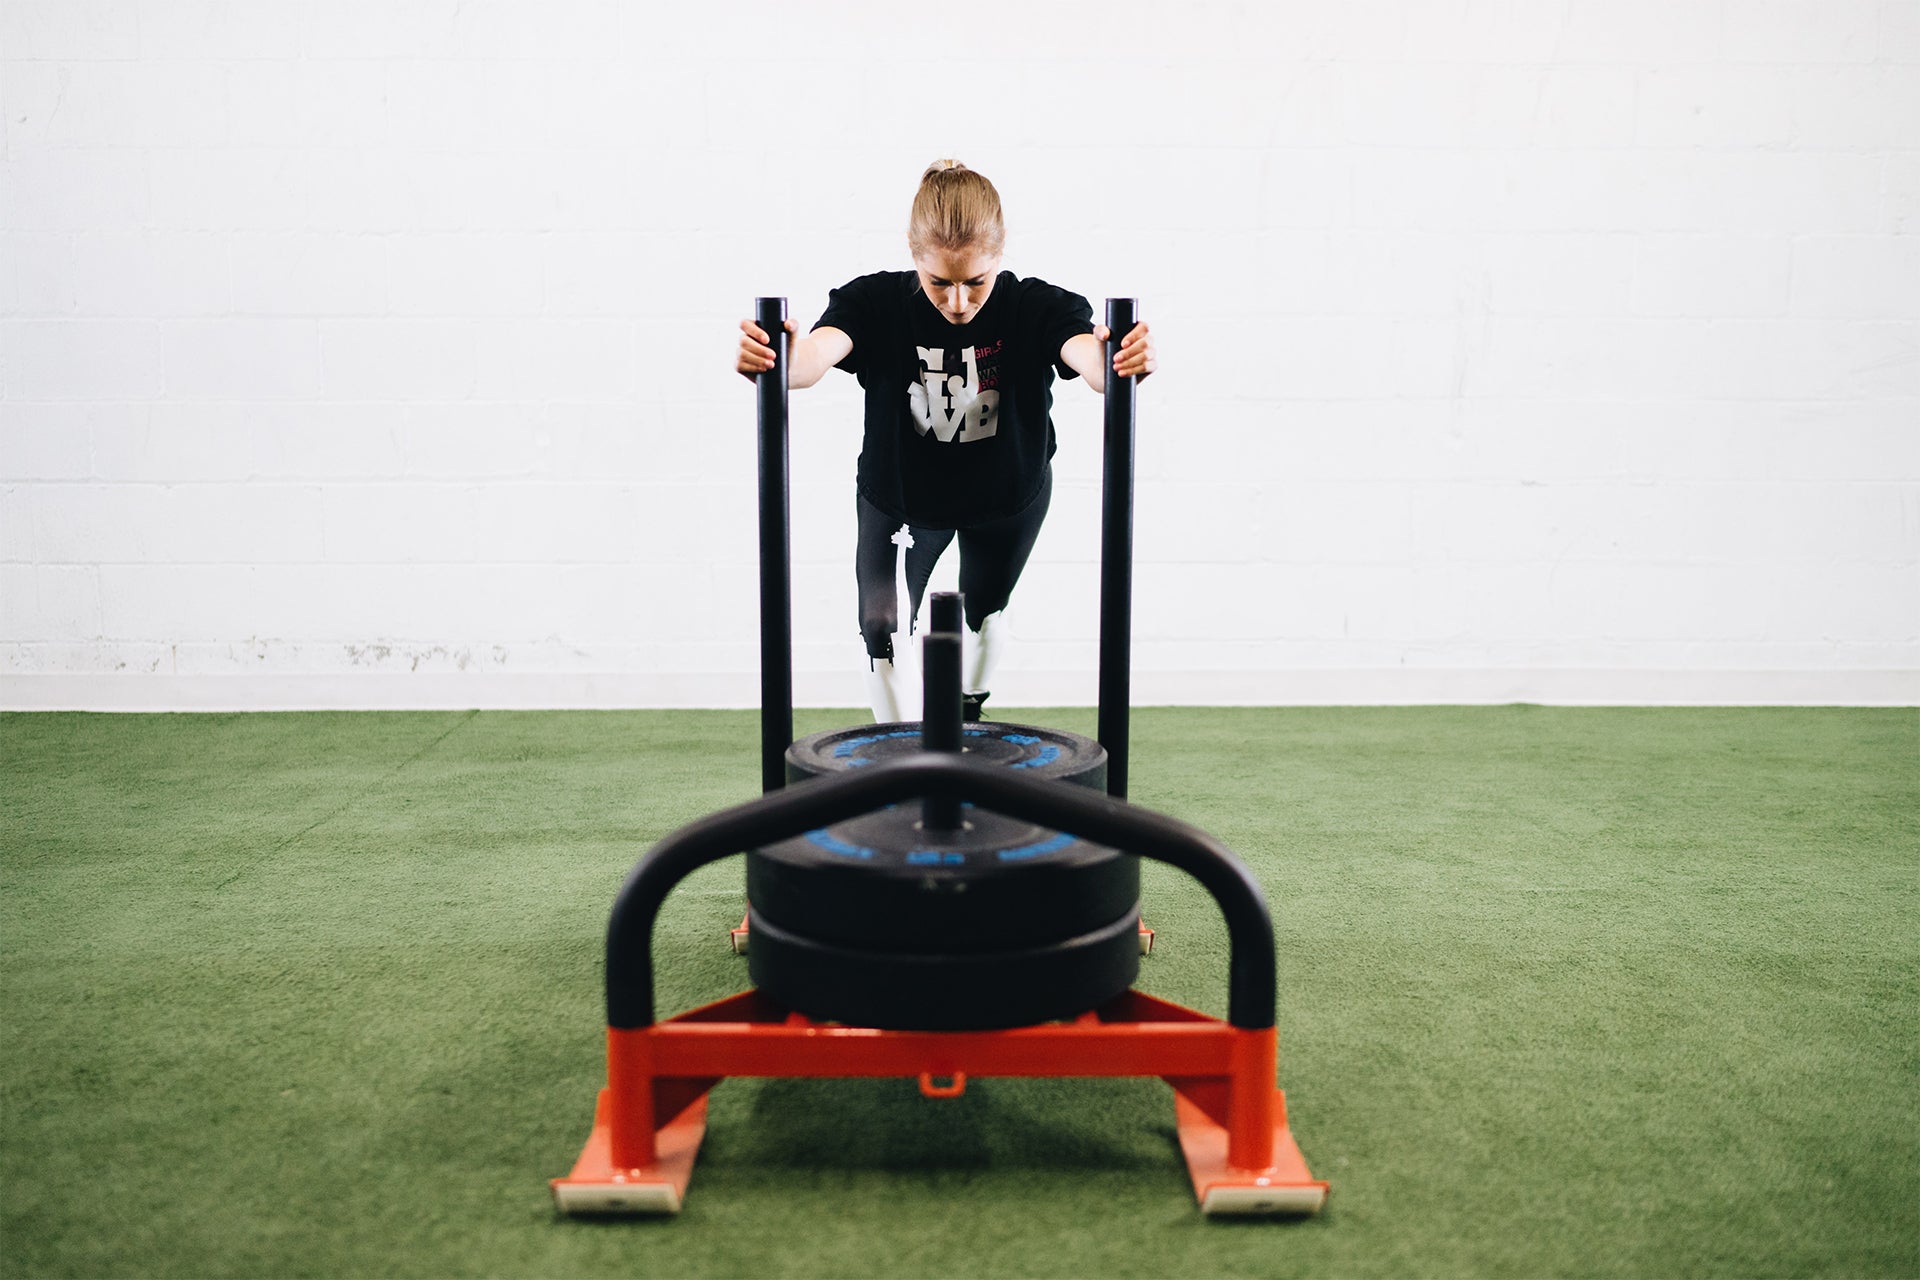 A women in workout clothes pushing a weighted sled